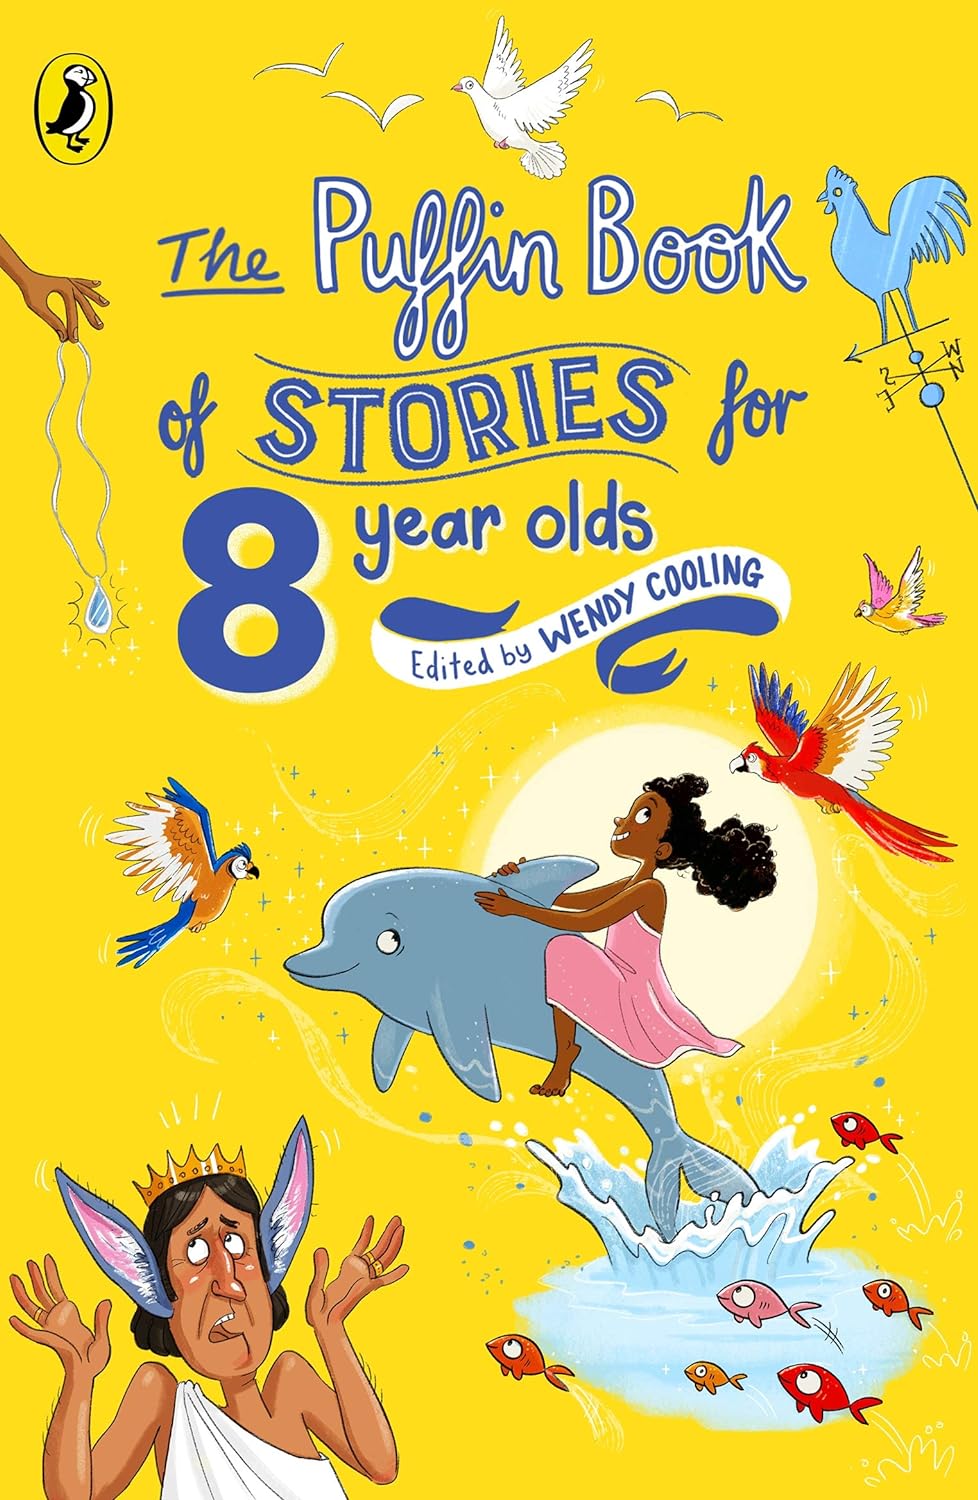 The Puffin Book of Stories for Eight-year-old [Paperback]